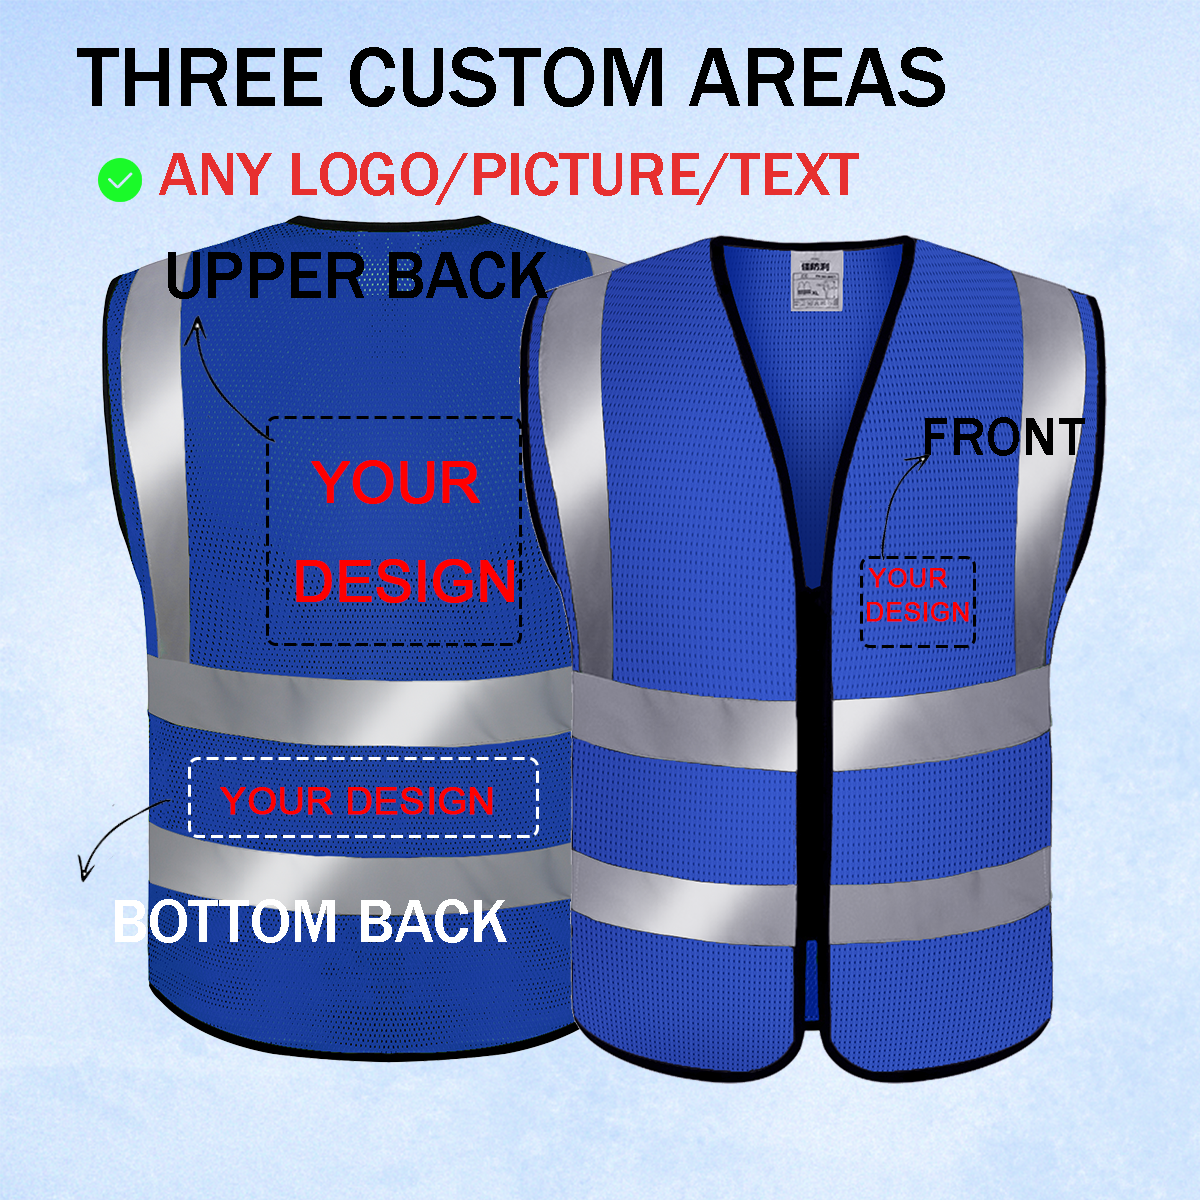 Personalize Your Safety Vest